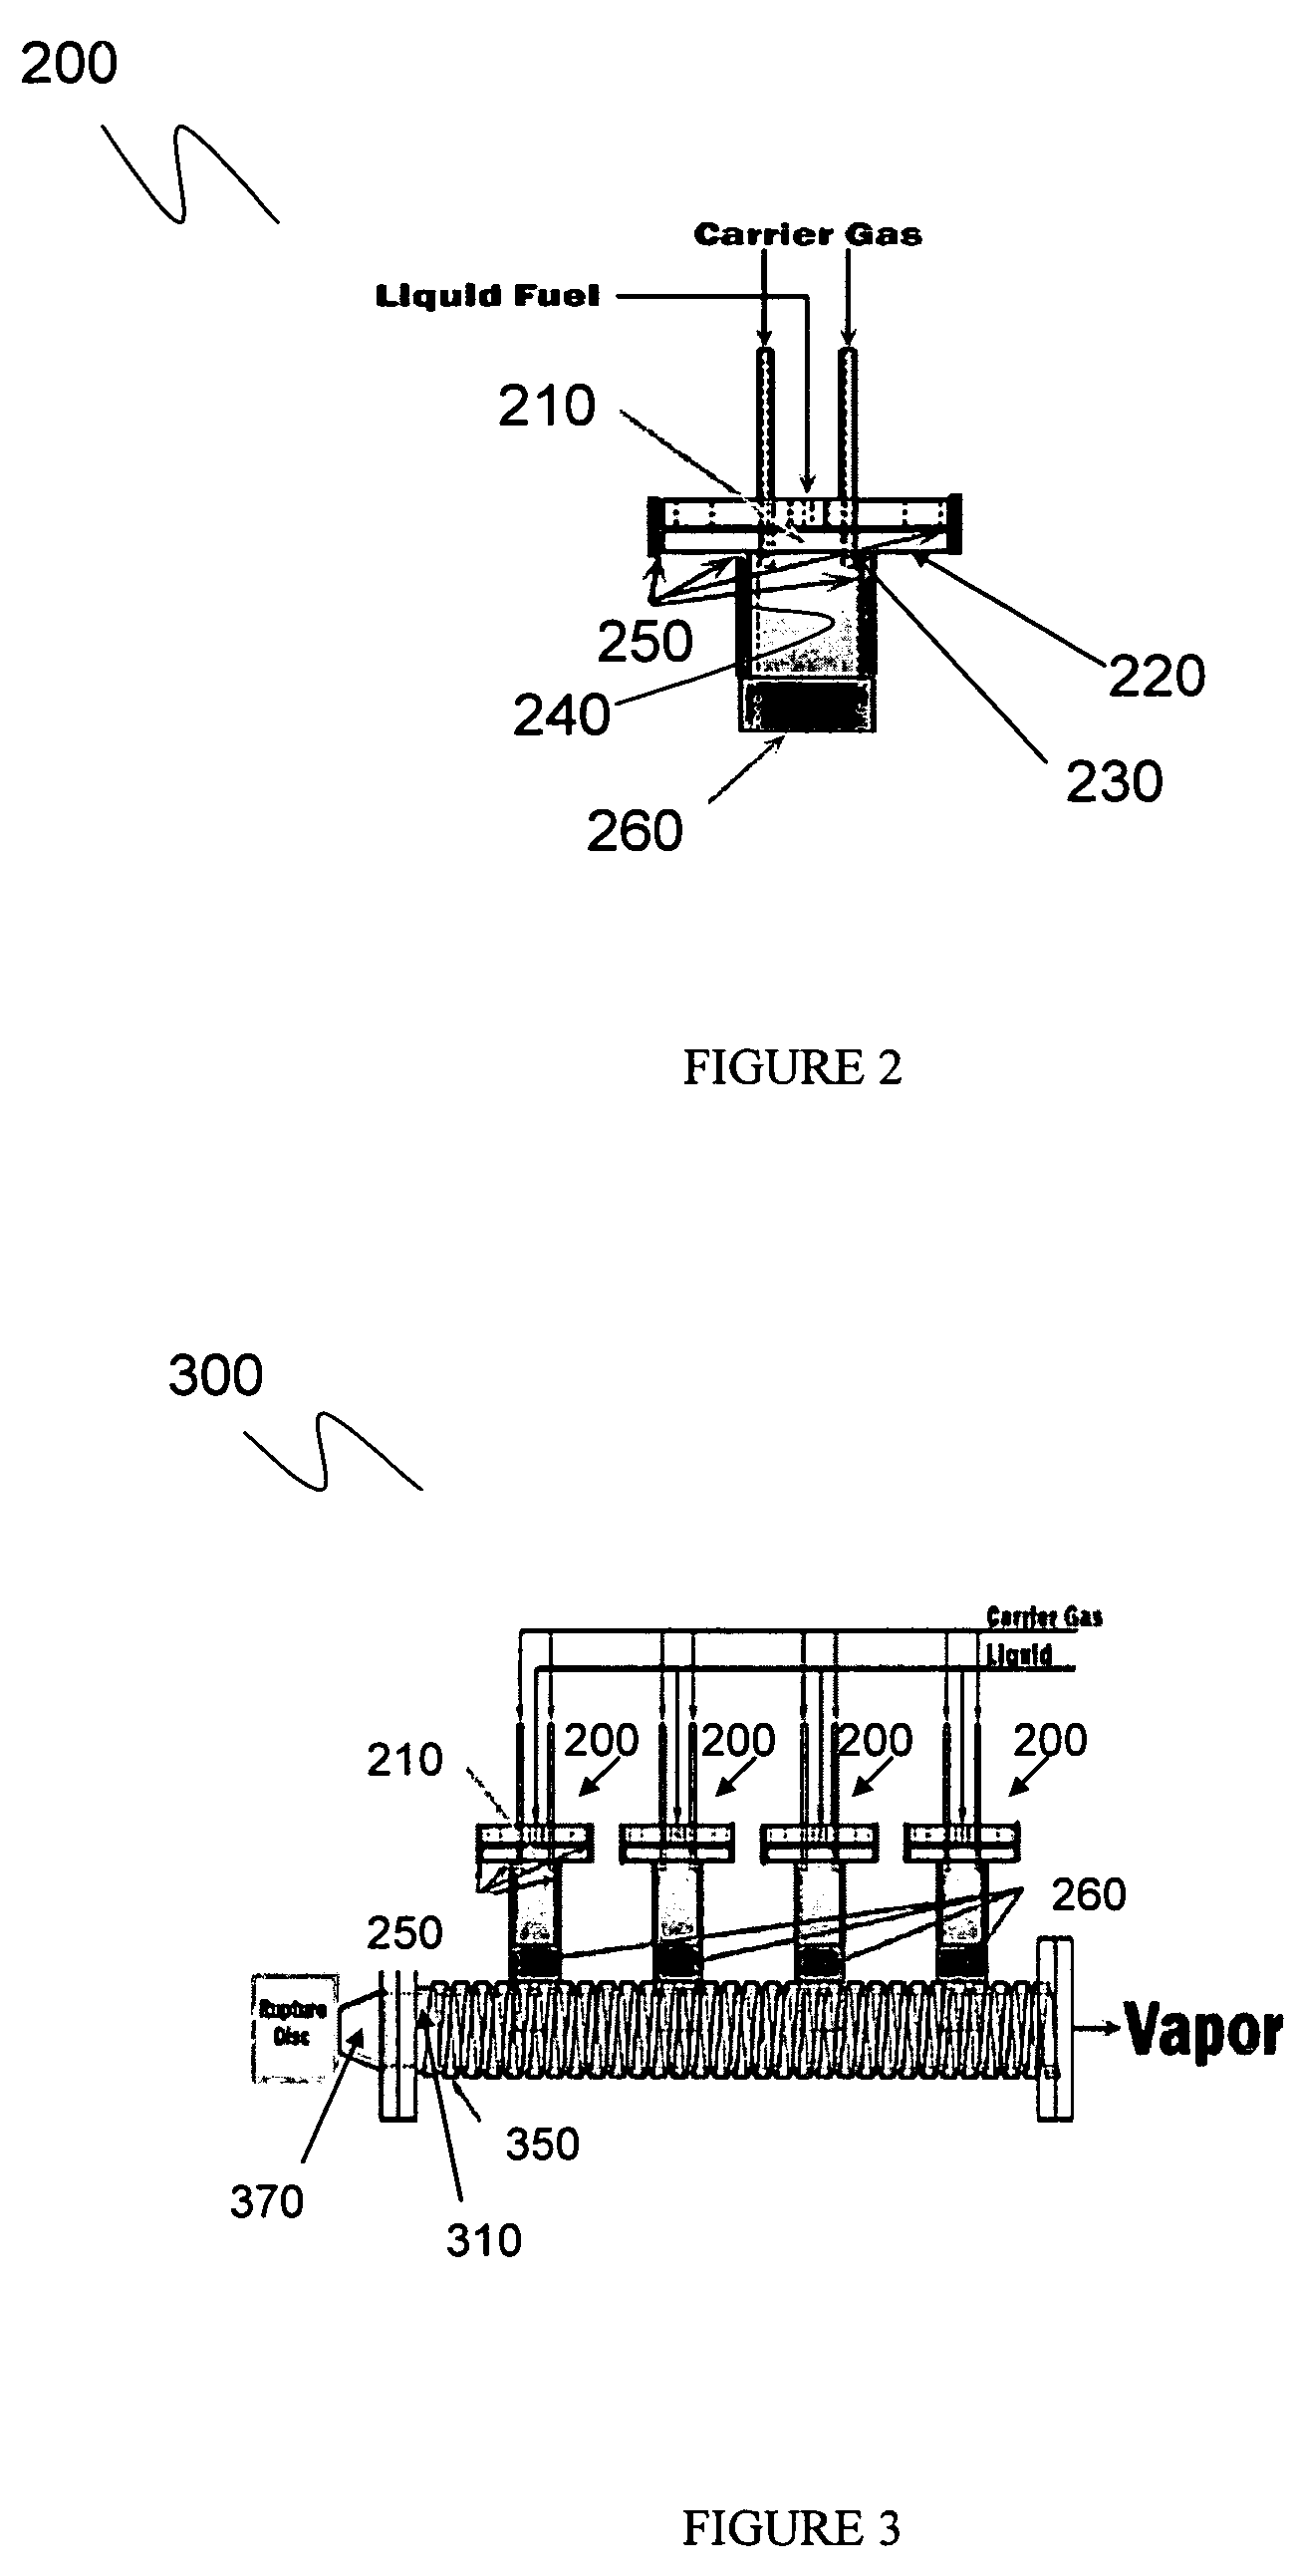 Method and apparatus for conditioning liquid hydrocarbon fuels